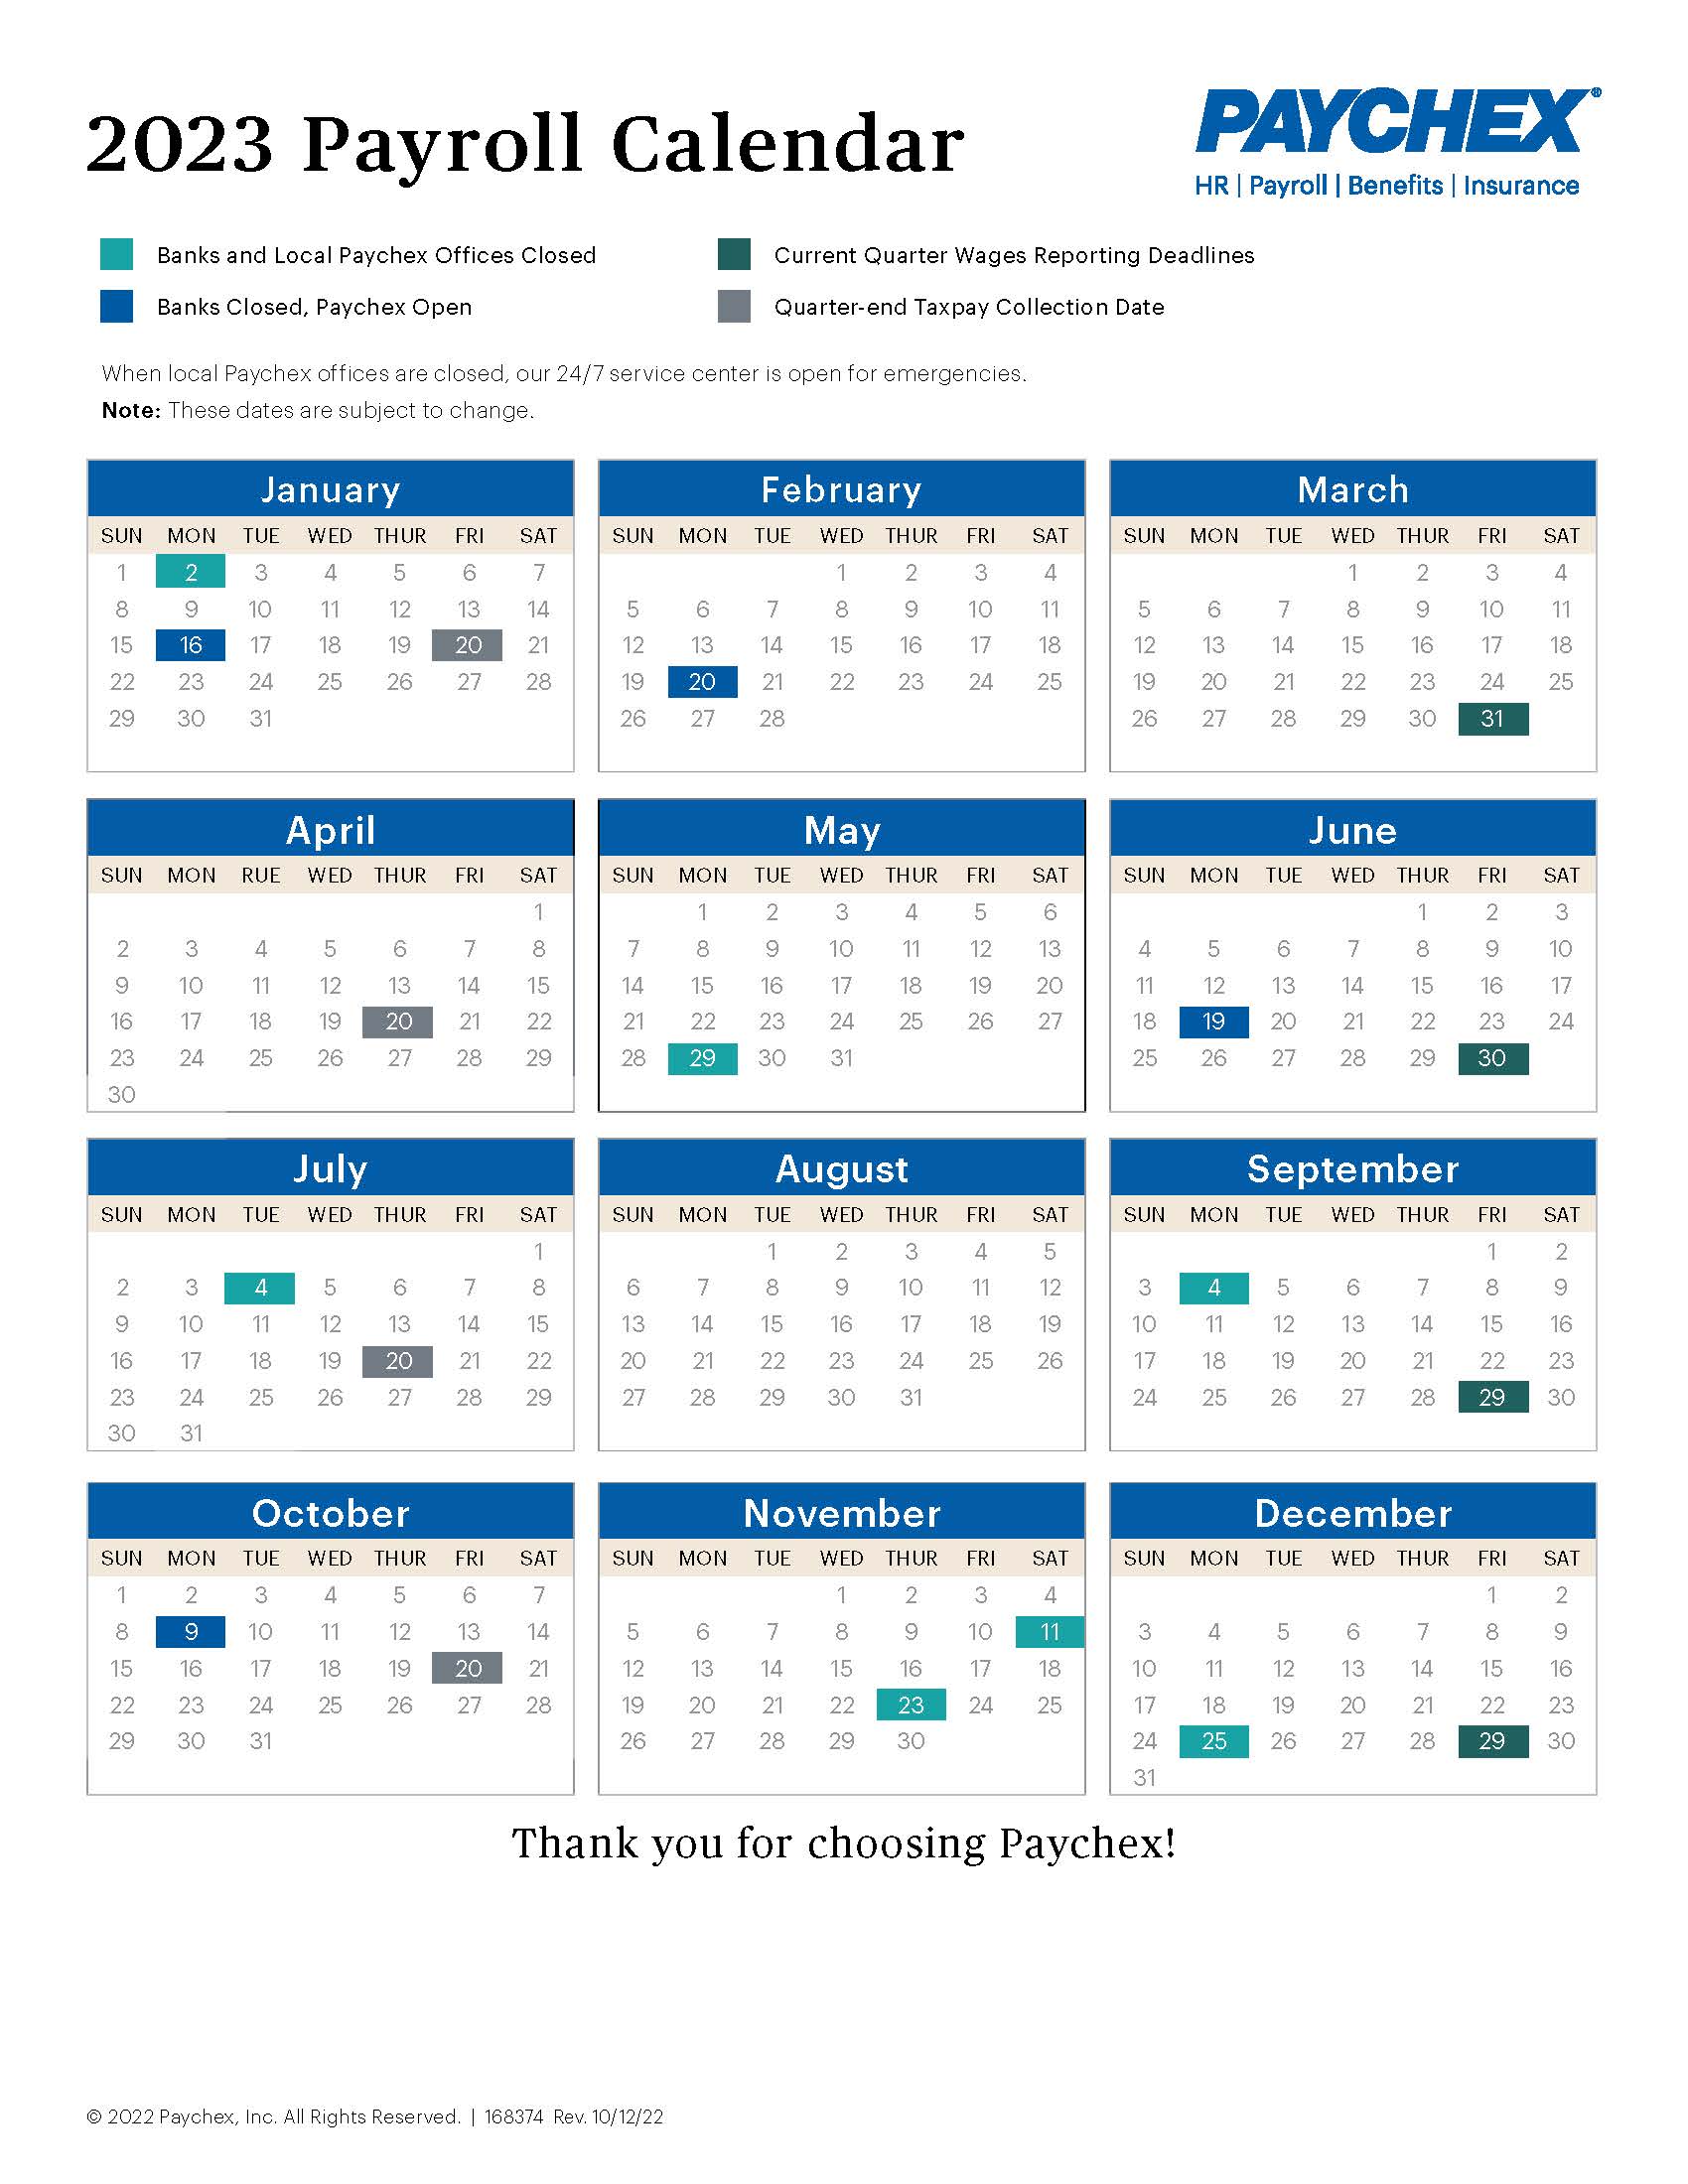 2023/2024 Payroll Calendar How Many Pay Periods Are There? Paychex